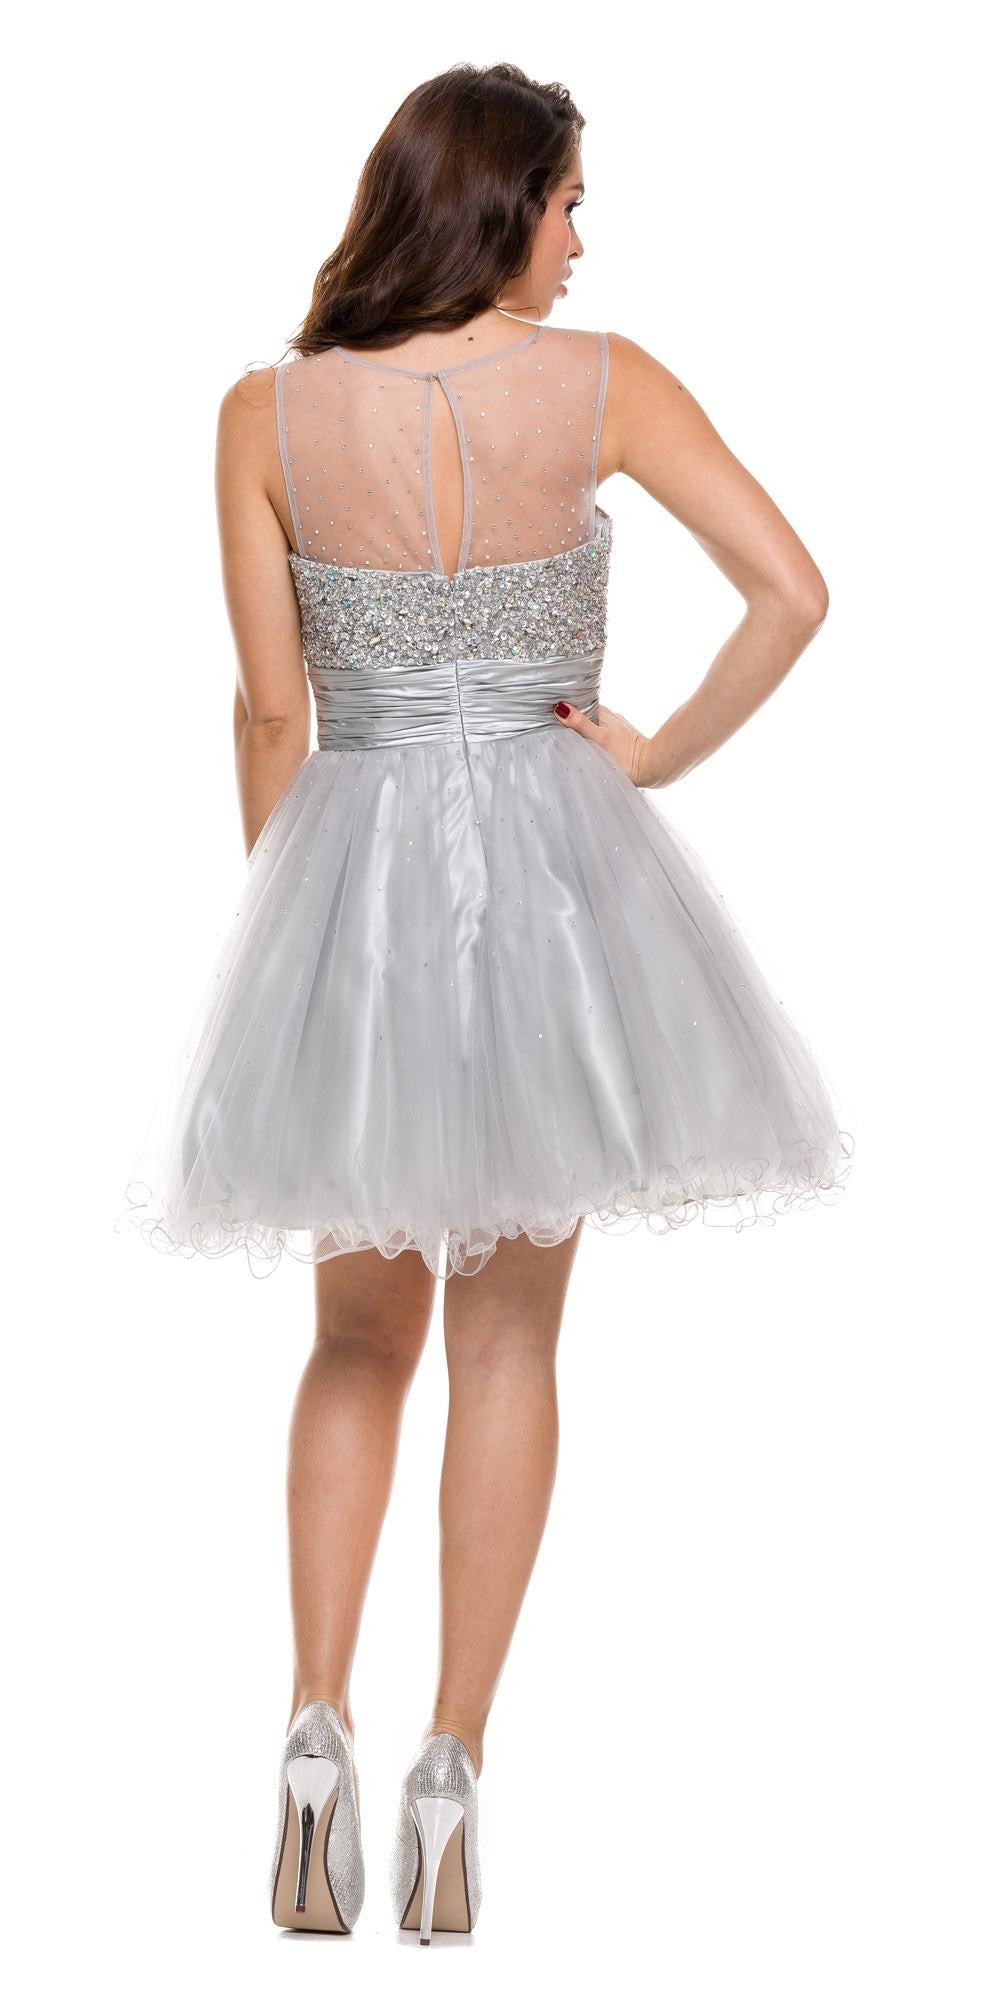 Ruched Empire Waist Illusion Neck Puffy Silver Prom Dress Back